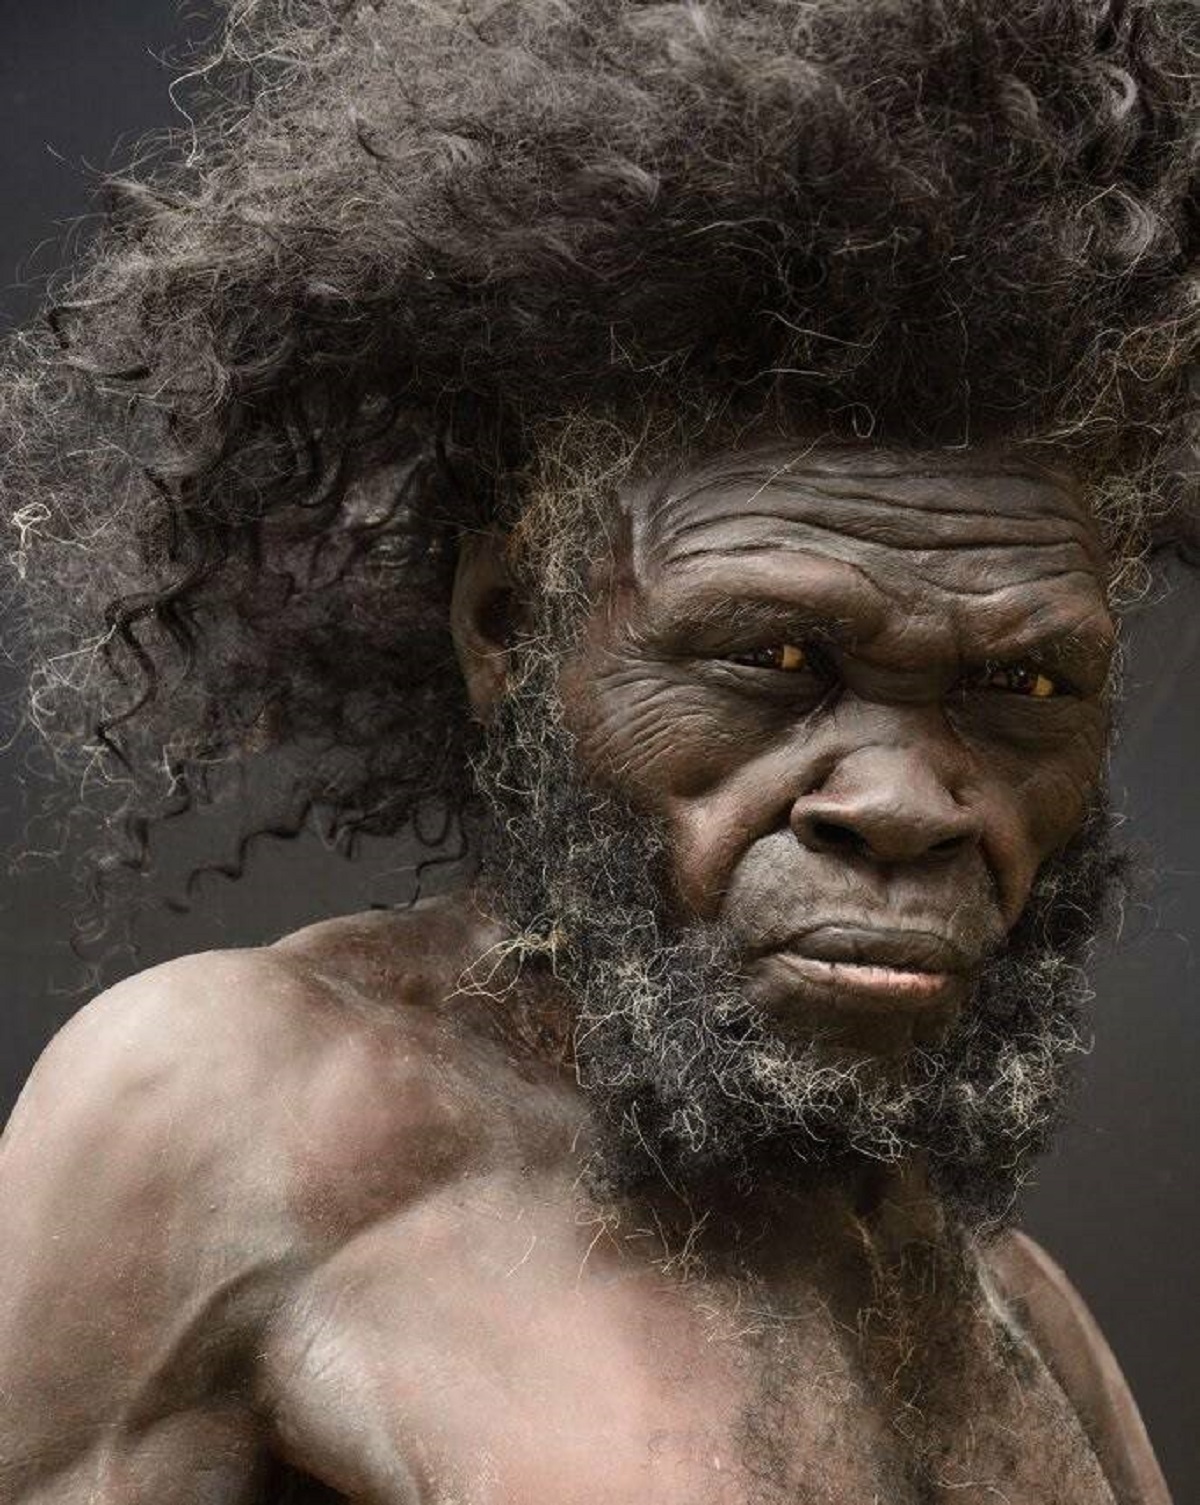 What the earliest modern humans likely looked like 160,000 years ago. (Photo created by Moesgaard Museum in Denmark)